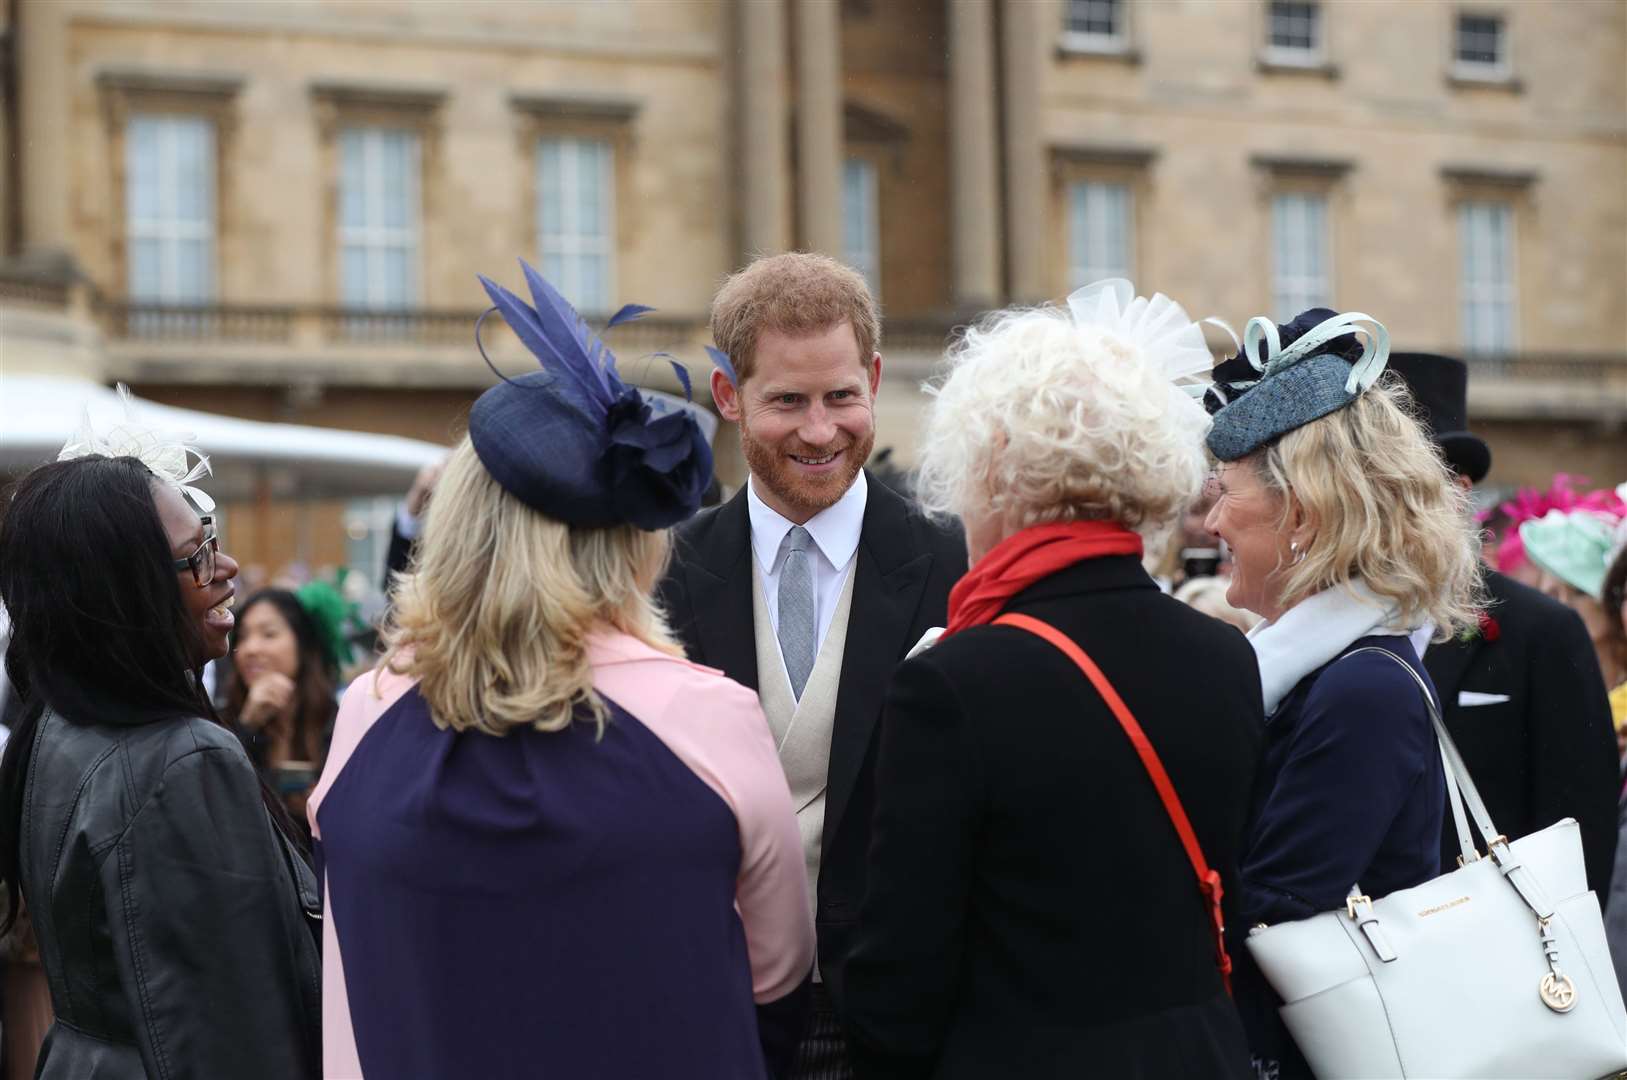 The Duke of Sussex in conversation with guests during a royal garden party (Yui Mok/PA)